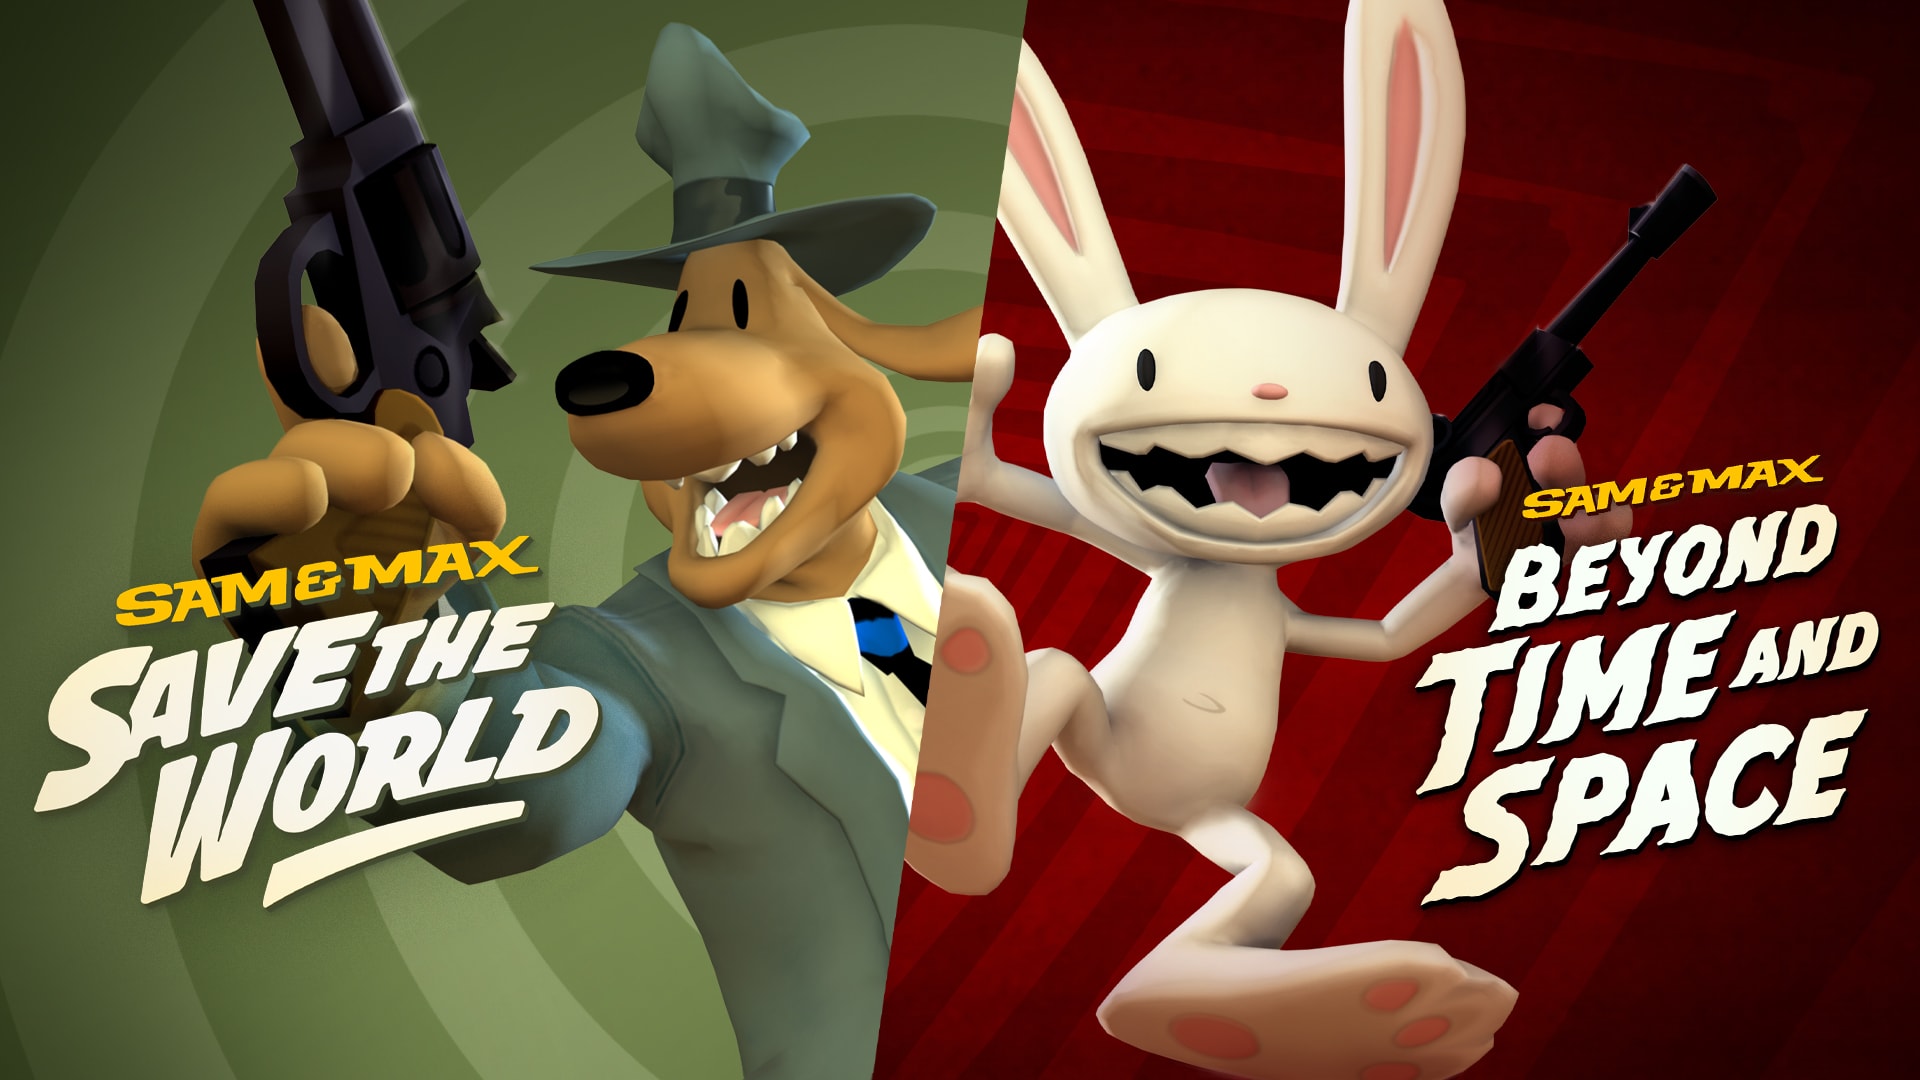 Sam & Max Save the World + Beyond Time and Space Bundle 1